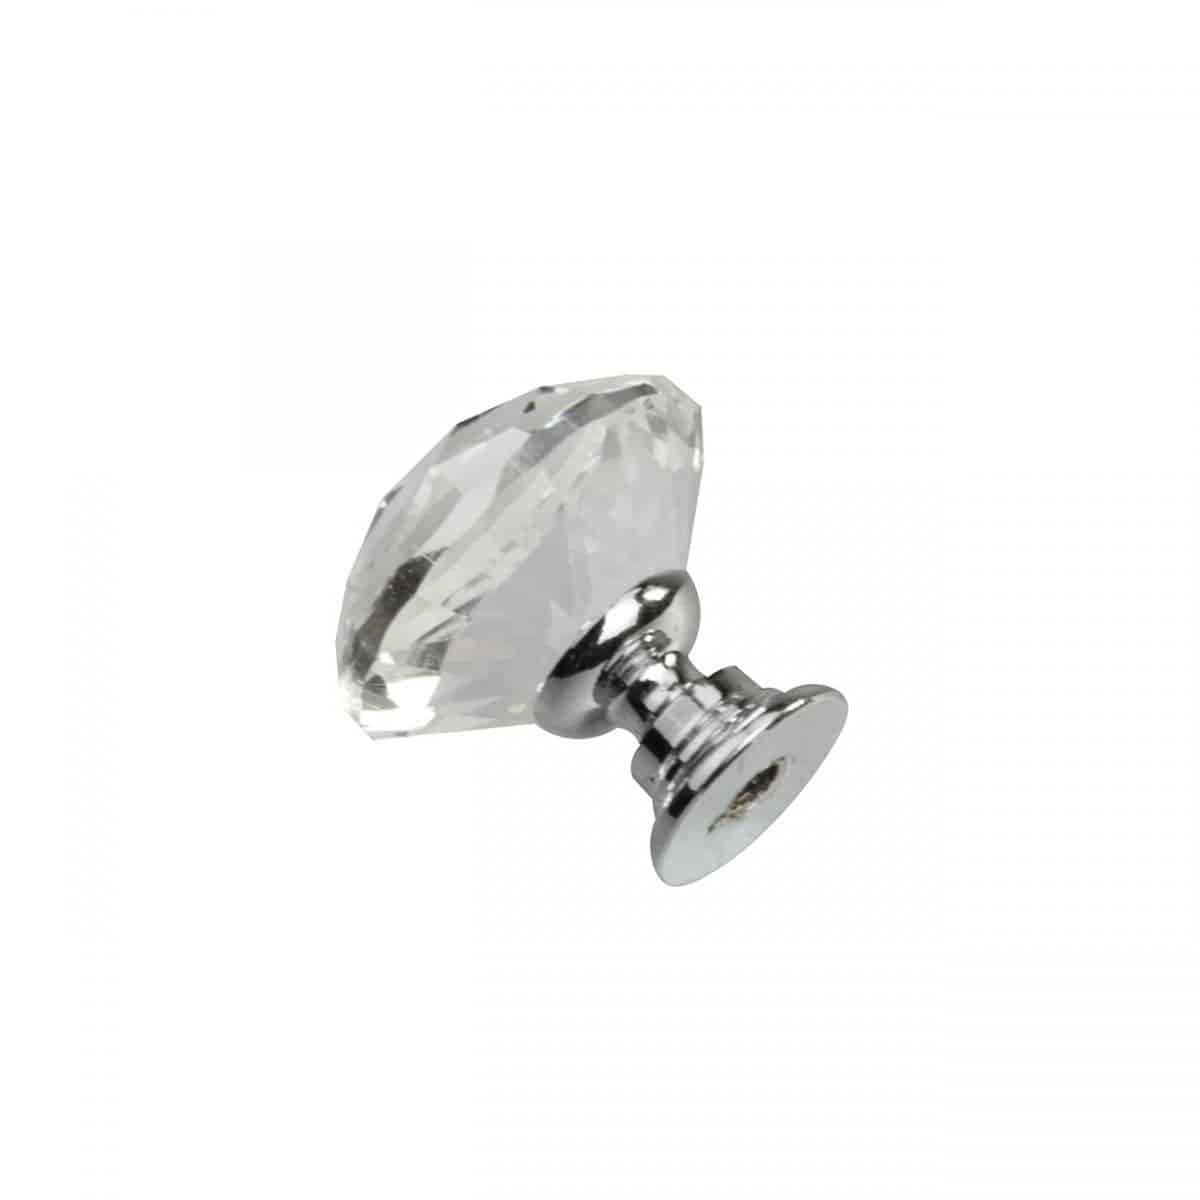 Crystal Knobs Are Perfect For Gray Cabinets In Glam Homes